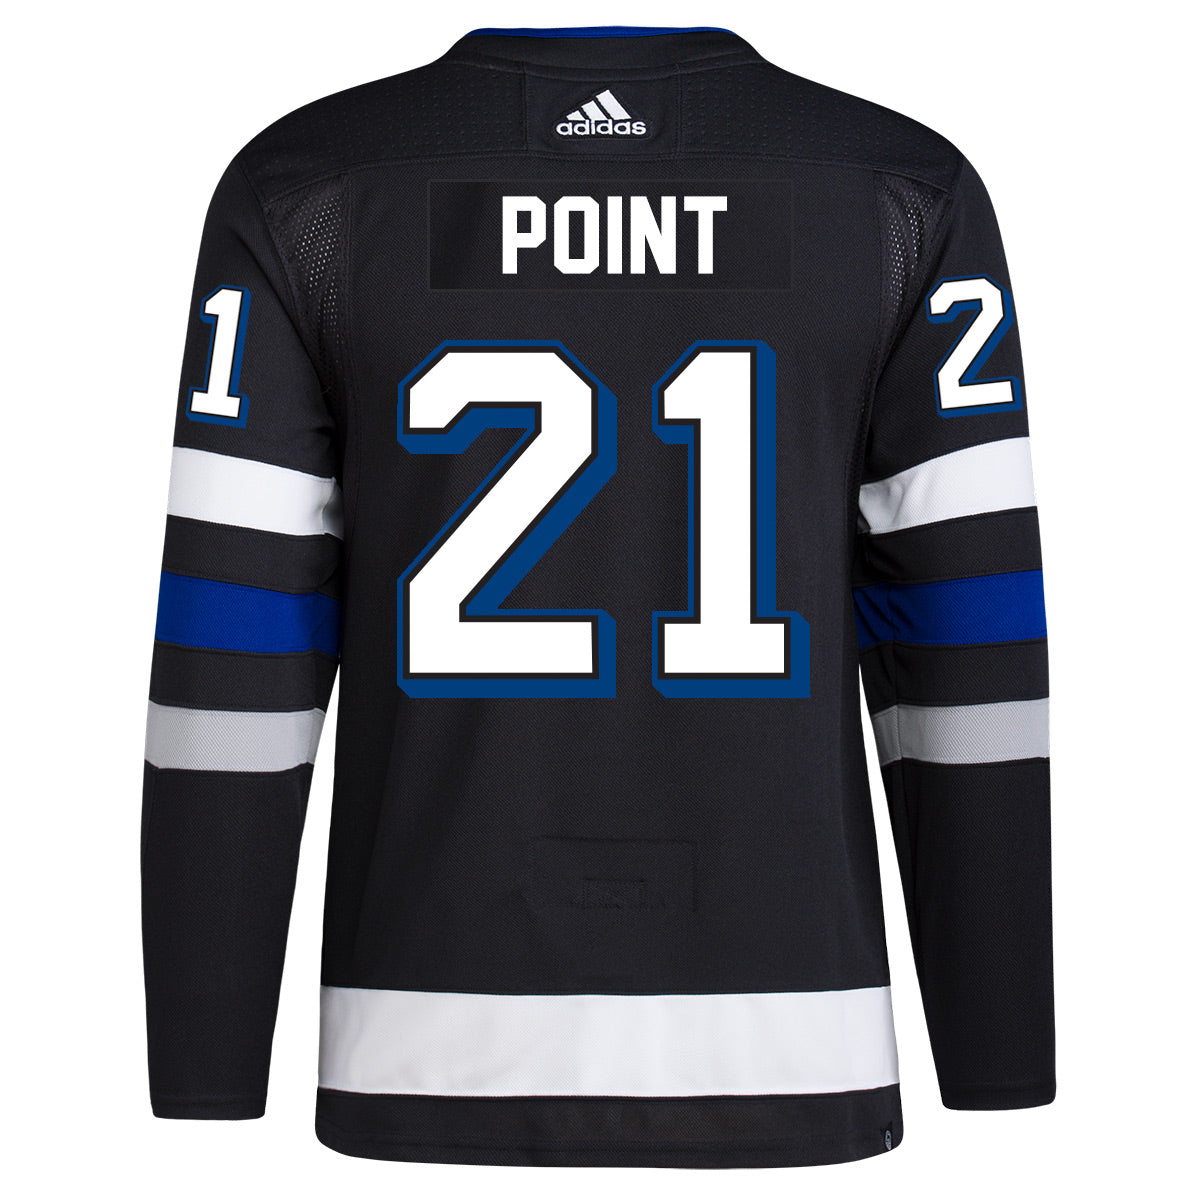 #21 POINT Primegreen ADIZERO Lightning Third Jersey with Authentic Lettering